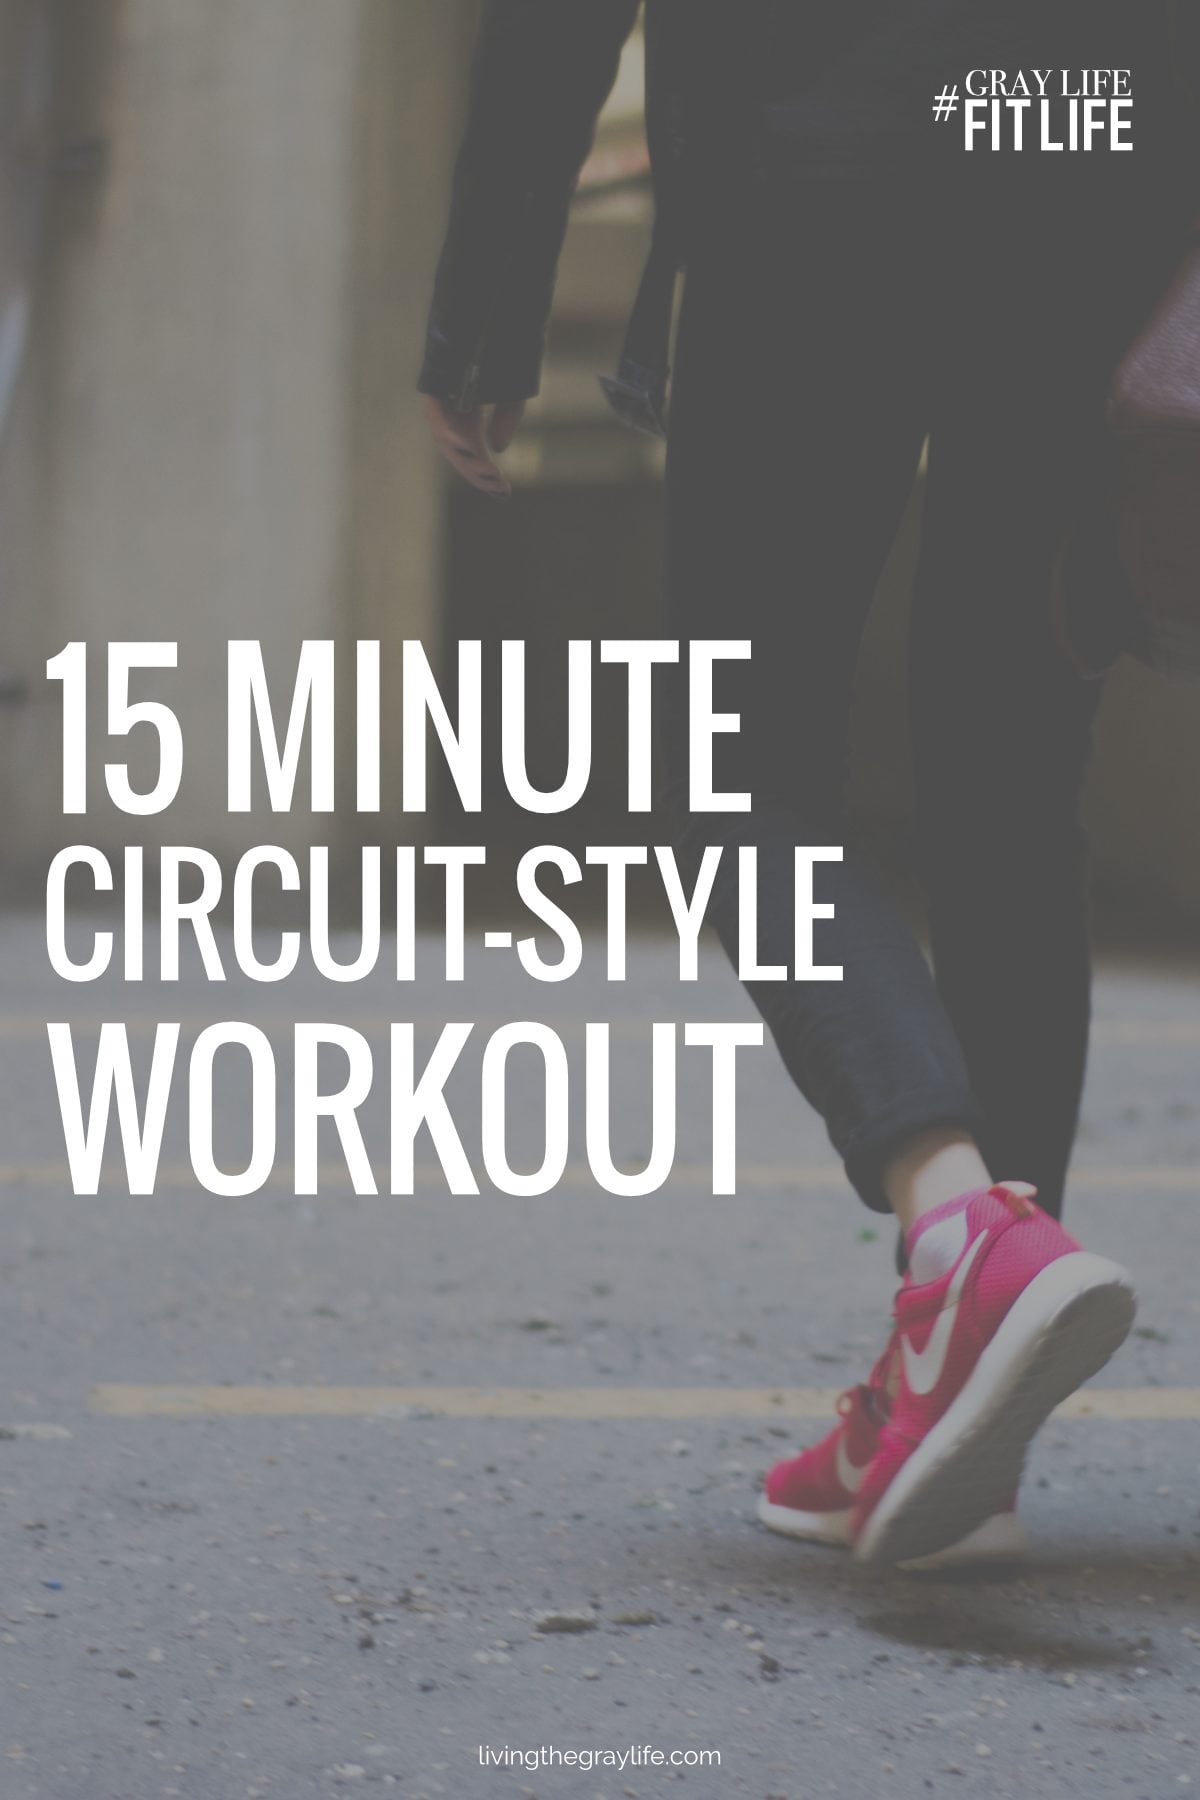 15 Minute Circuit Workout